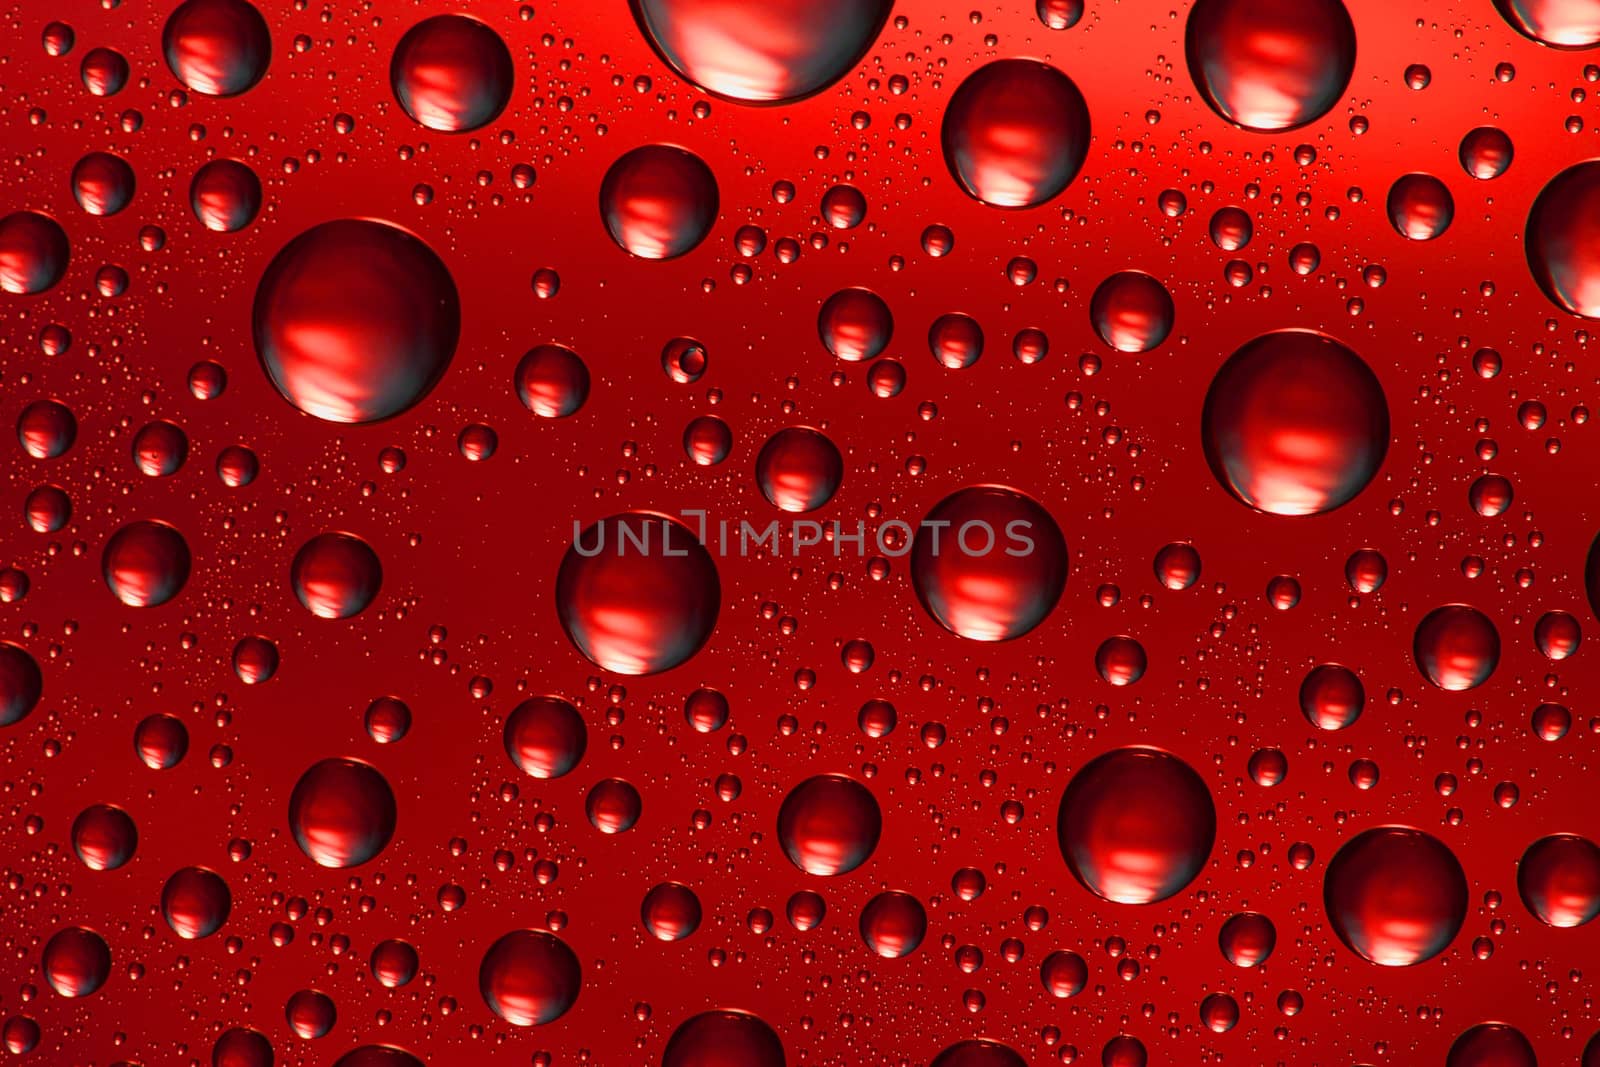 red water drops on glass,could be used as background